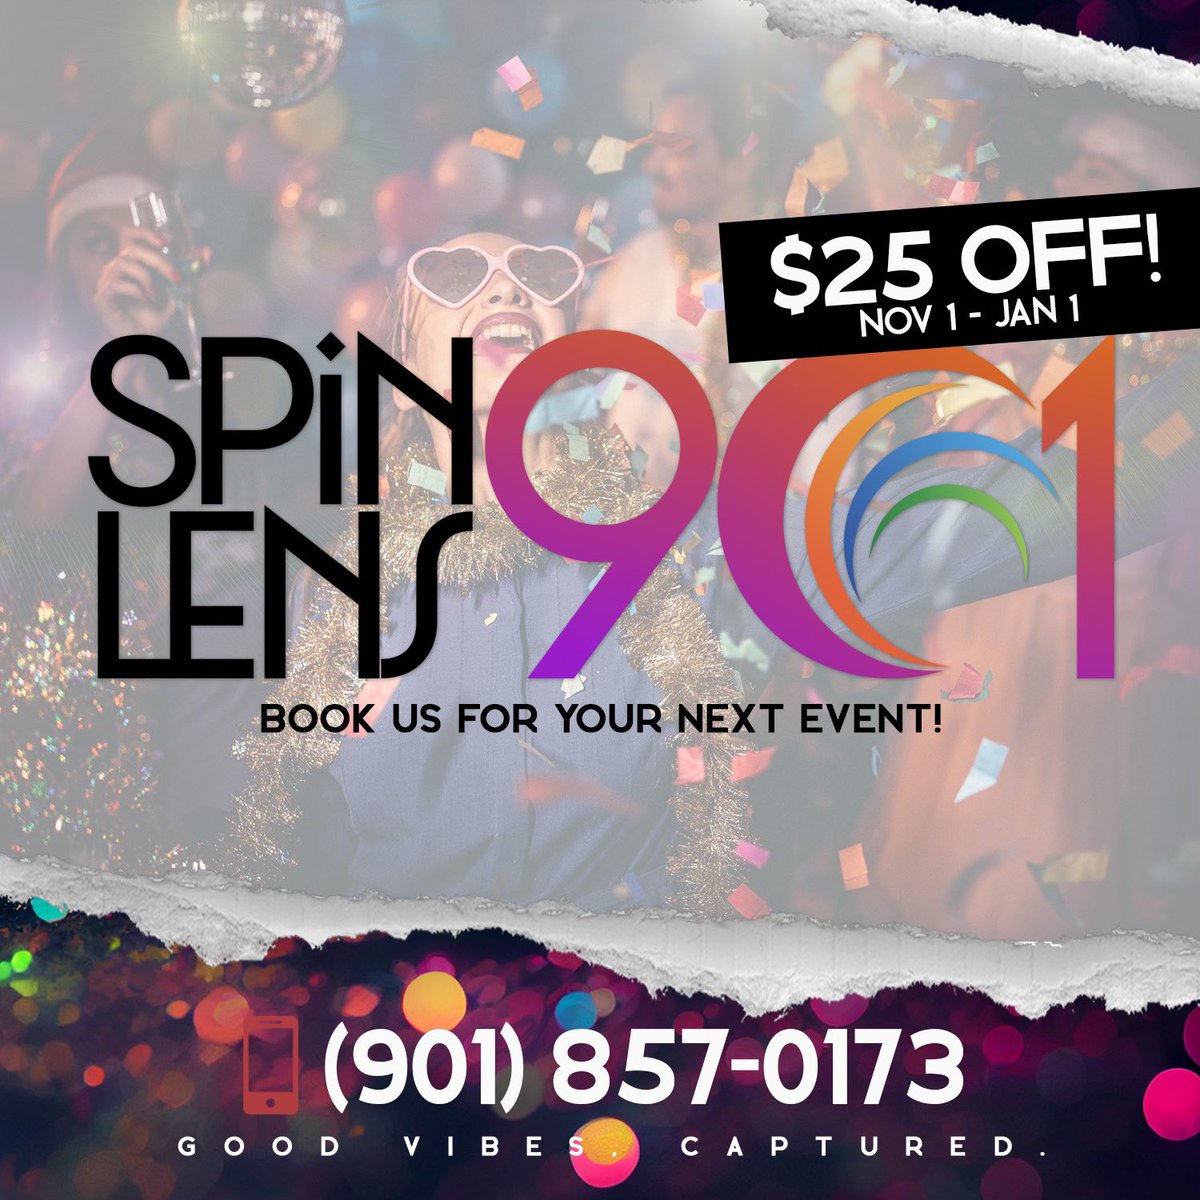 It’s almost holiday party season! Book now! #spinlens901 #360photobooth #360photoboothrental #360booth #holidayparties #partyinstyle #holidaydiscount #memphis #jackson #southaven #olivebranch #hernando #shelbycounty #desotocounty #fayettecounty